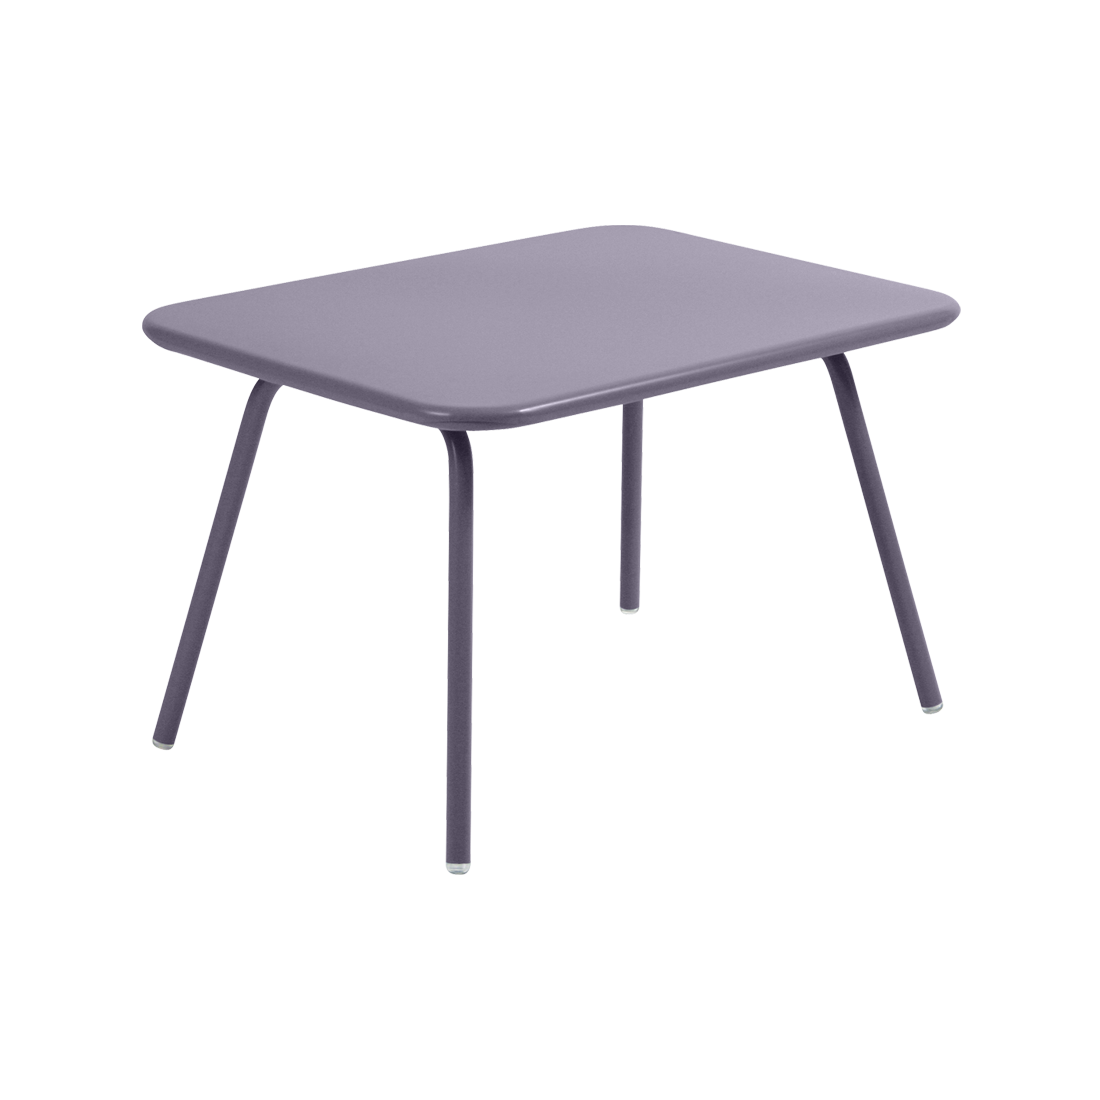 LUXEMBOURG KID / TABLE 76 X 55.5CM